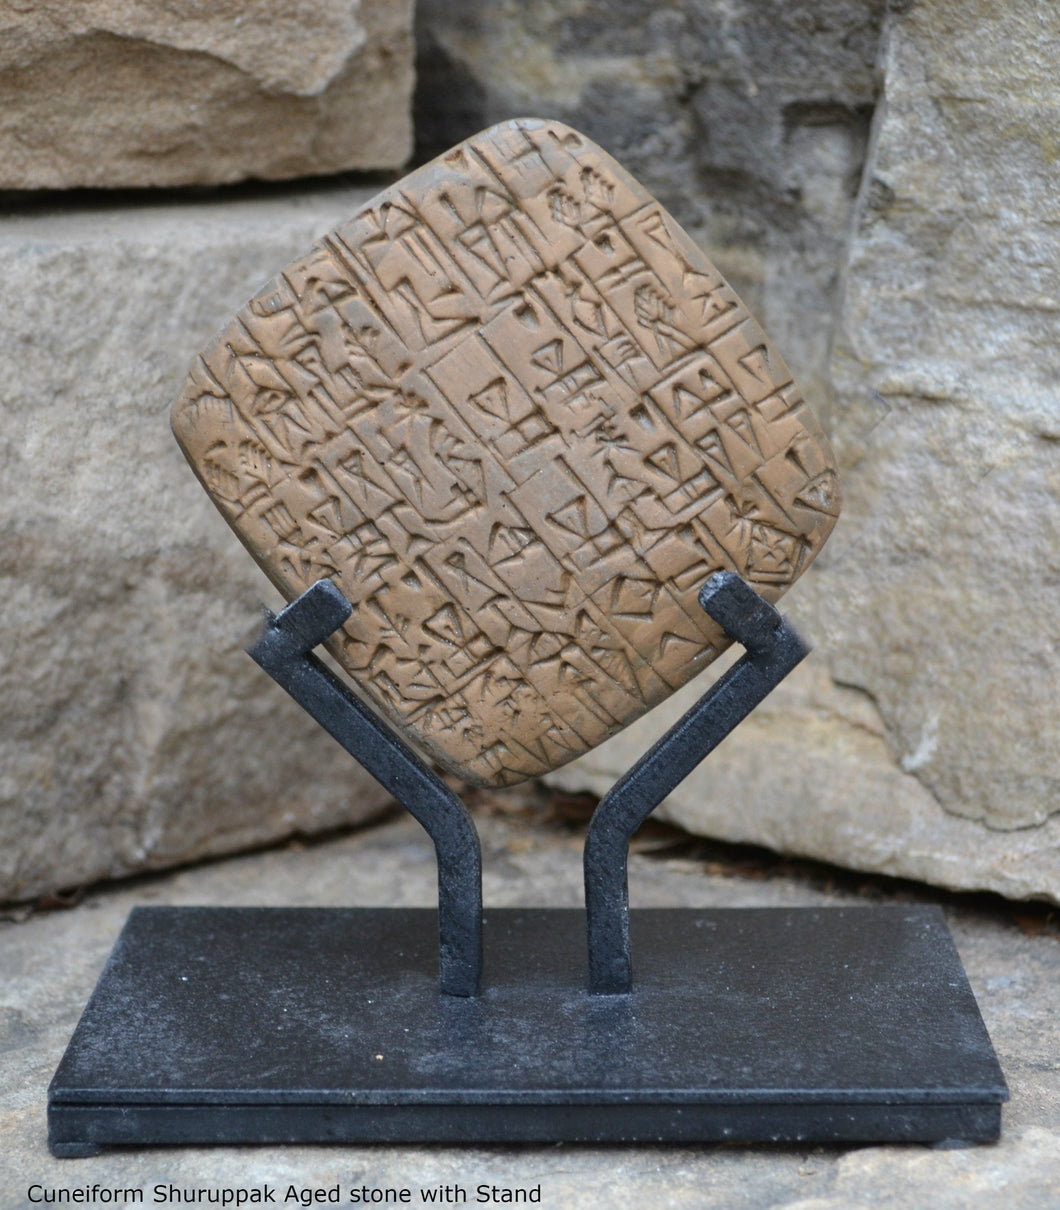 Cuneiform Bill sale of a male slave and a building in Shuruppak, Sumerian tablet museum replica tablet Sculpture www.Neo-Mfg.com with stand